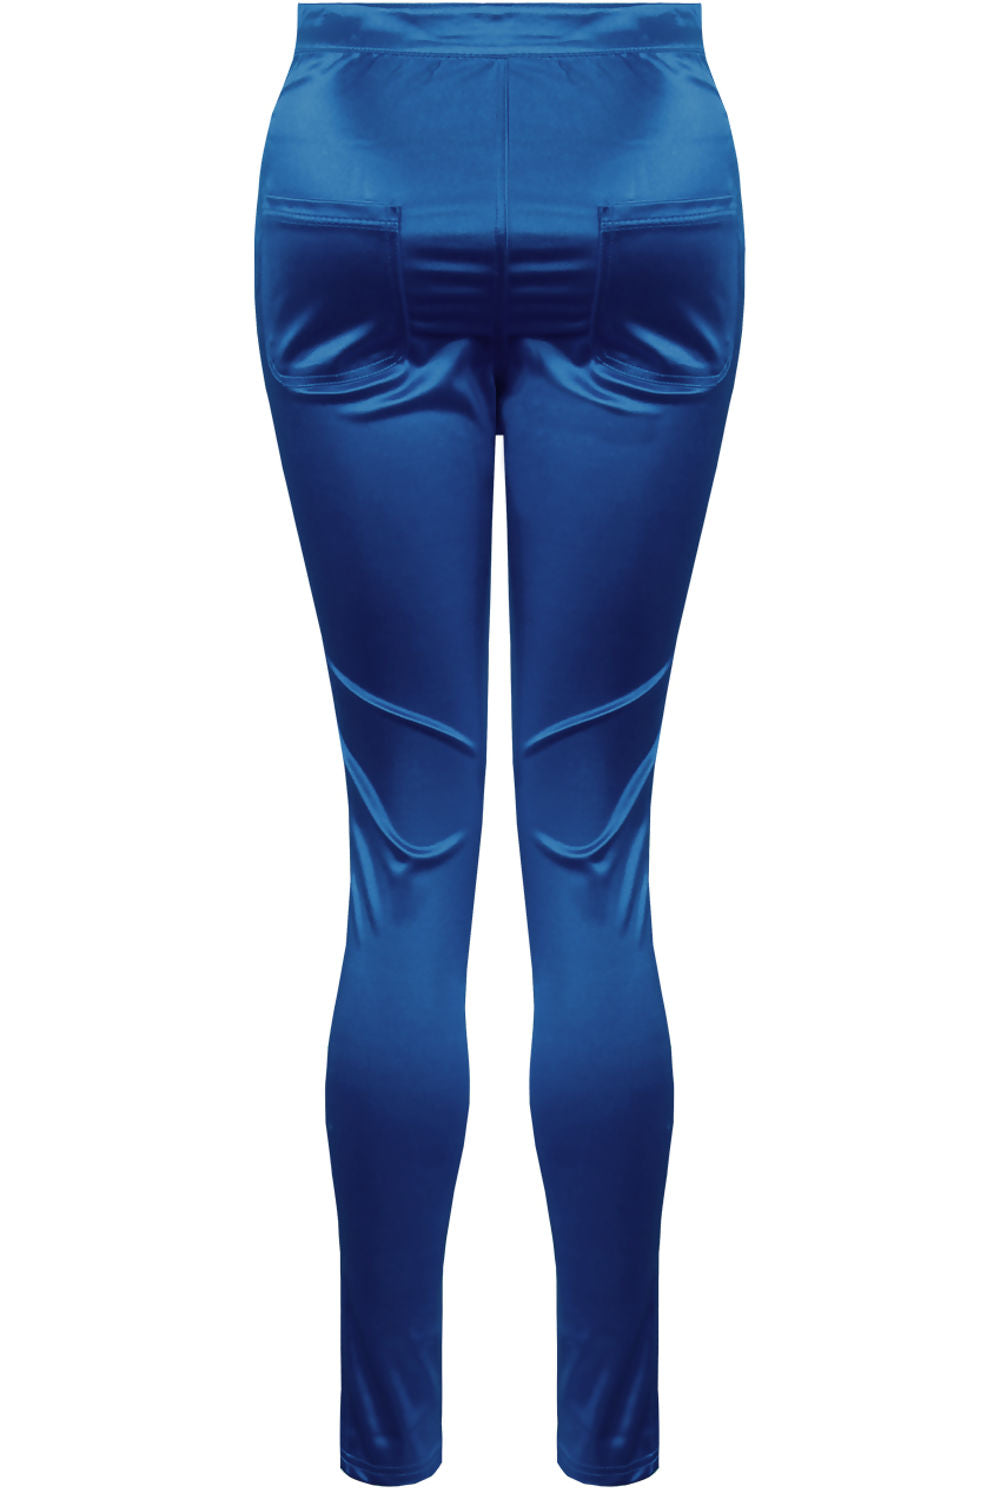 Ghost manequin wears a blue satin skinny fit trousers with front button closure. The ghost manequin stands to the side, the side and the front of the trousers is visible. The back pockets are visible.